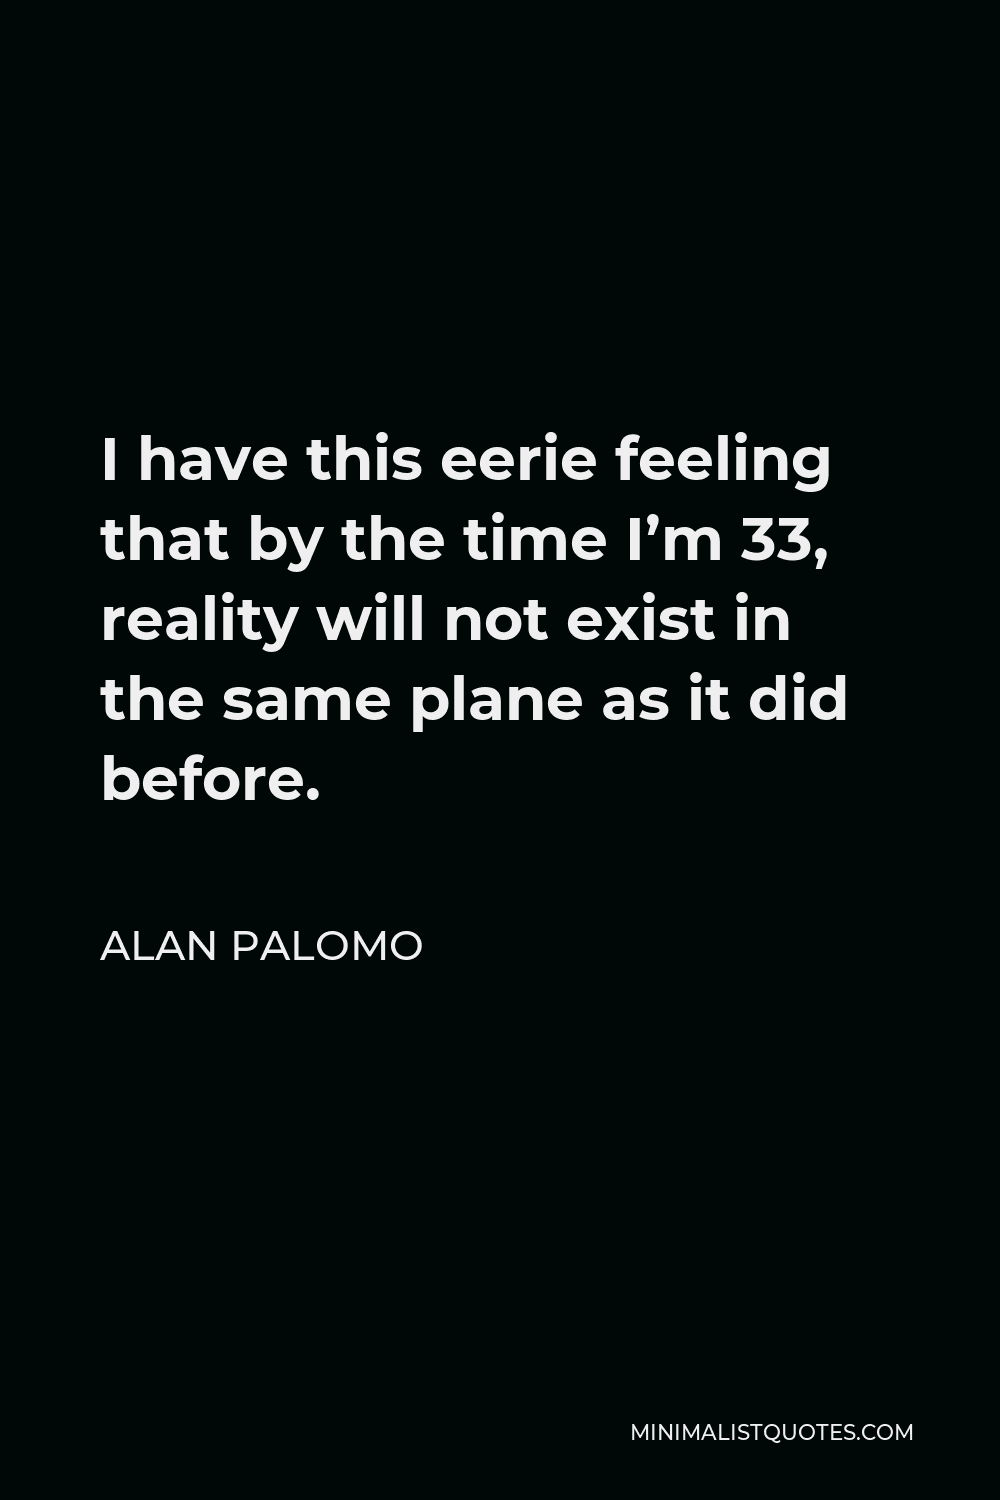 Alan Palomo Quote - I have this eerie feeling that by the time I’m 33, reality will not exist in the same plane as it did before.